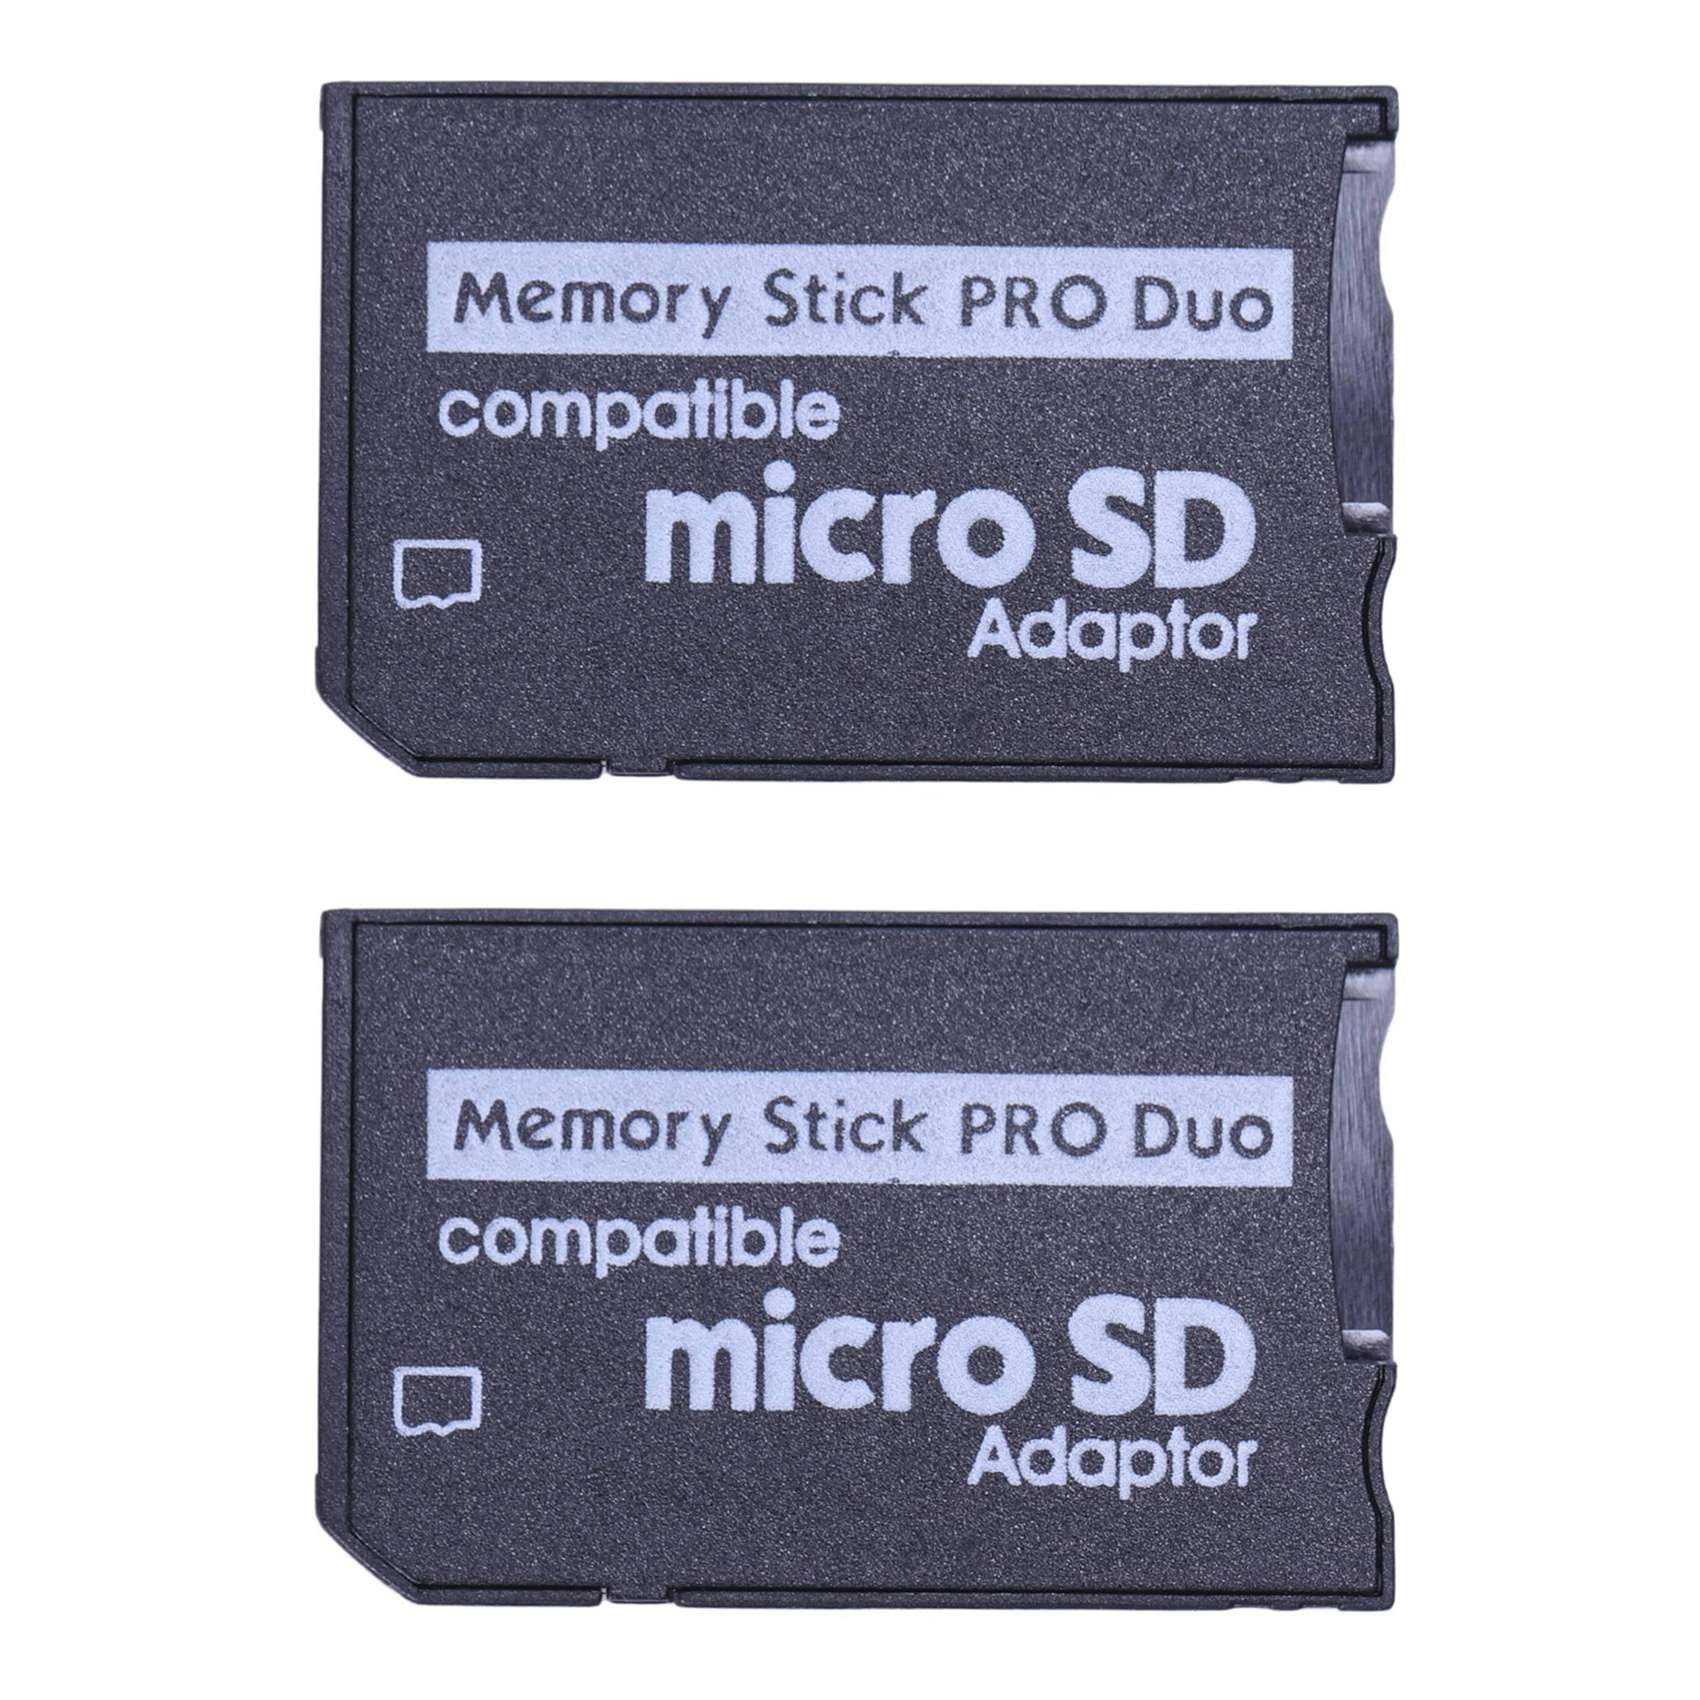 builder Interruption Untouched For Sony and PSP Series Micro SD SDHC TF to Memory Stick MS Pro Duo PSP  Adapter - Walmart.com